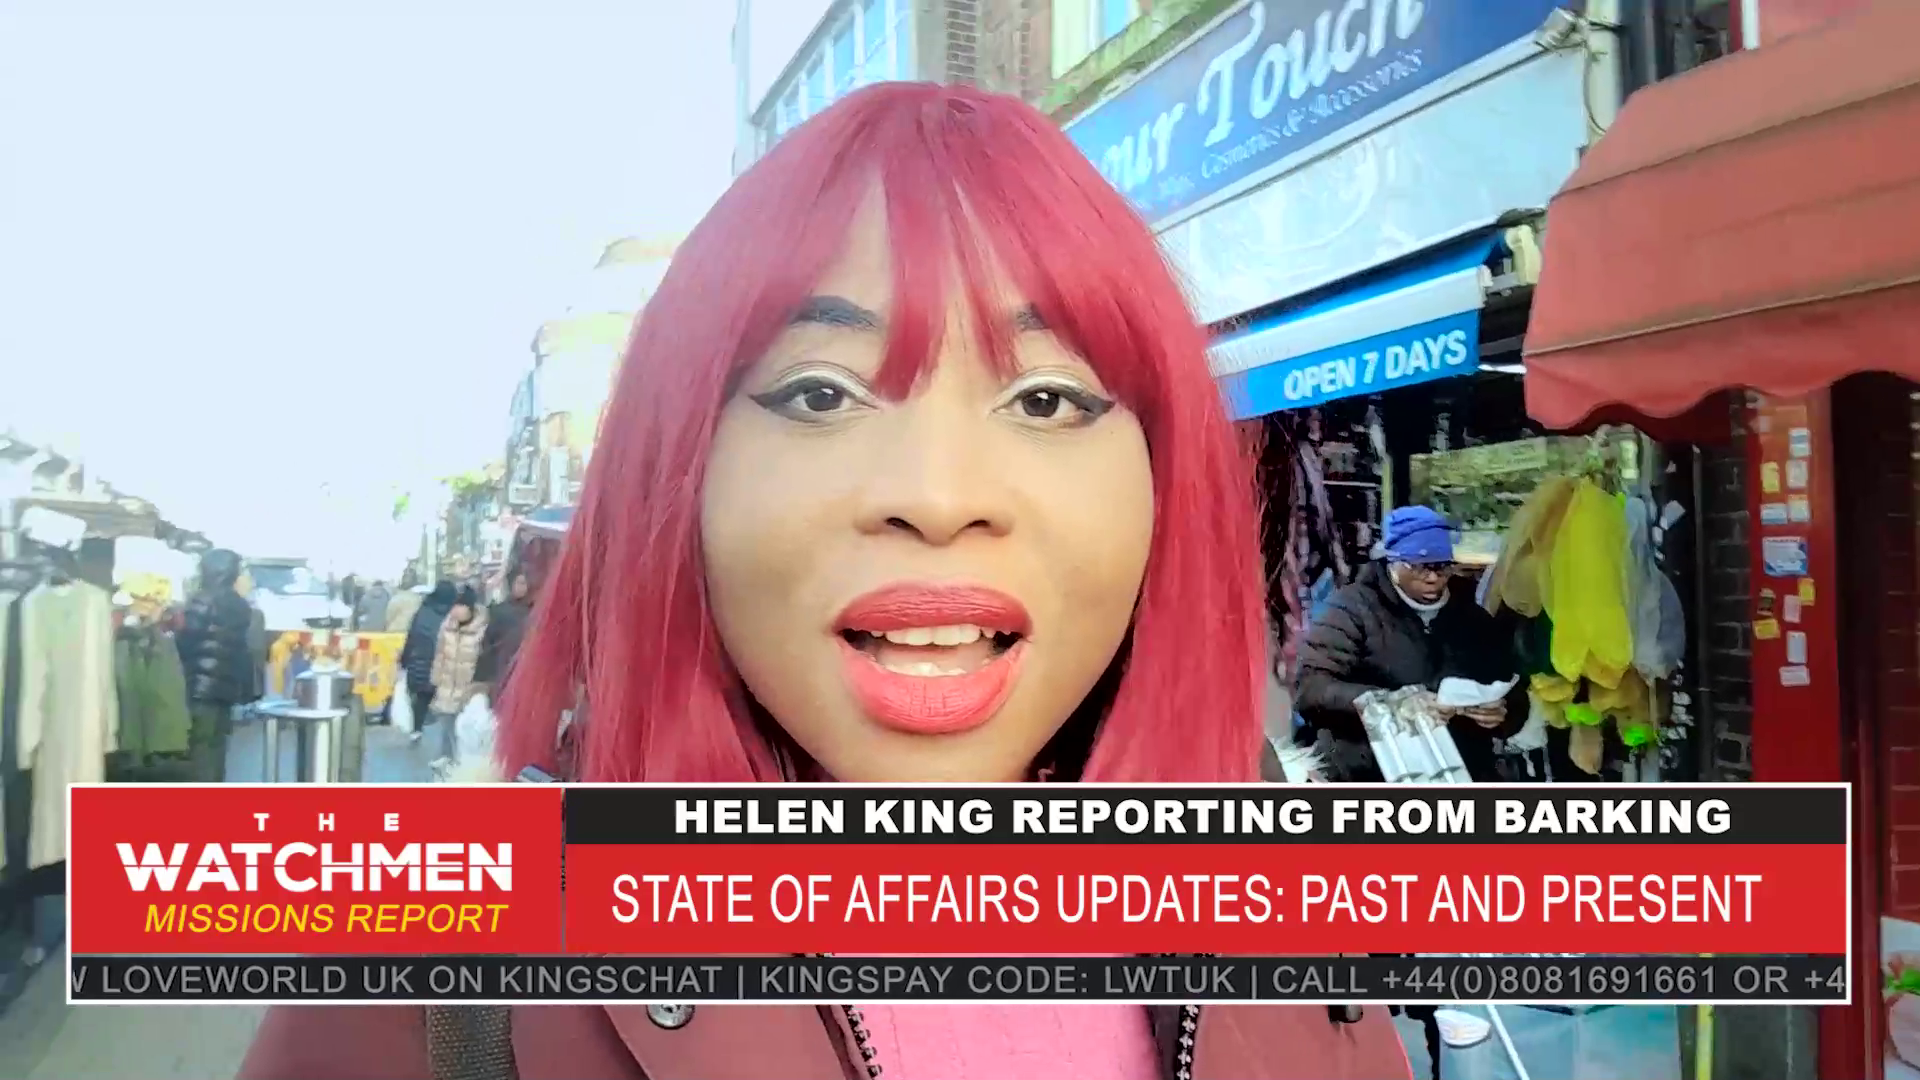 THE WATCHMEN_EP 94: HELEN KING'S SPECIAL REPORTS IN ICONIC LOCATIONS_PLAISTOW, UPTON PARK, EAST HAM, BARKING, BECONTREE